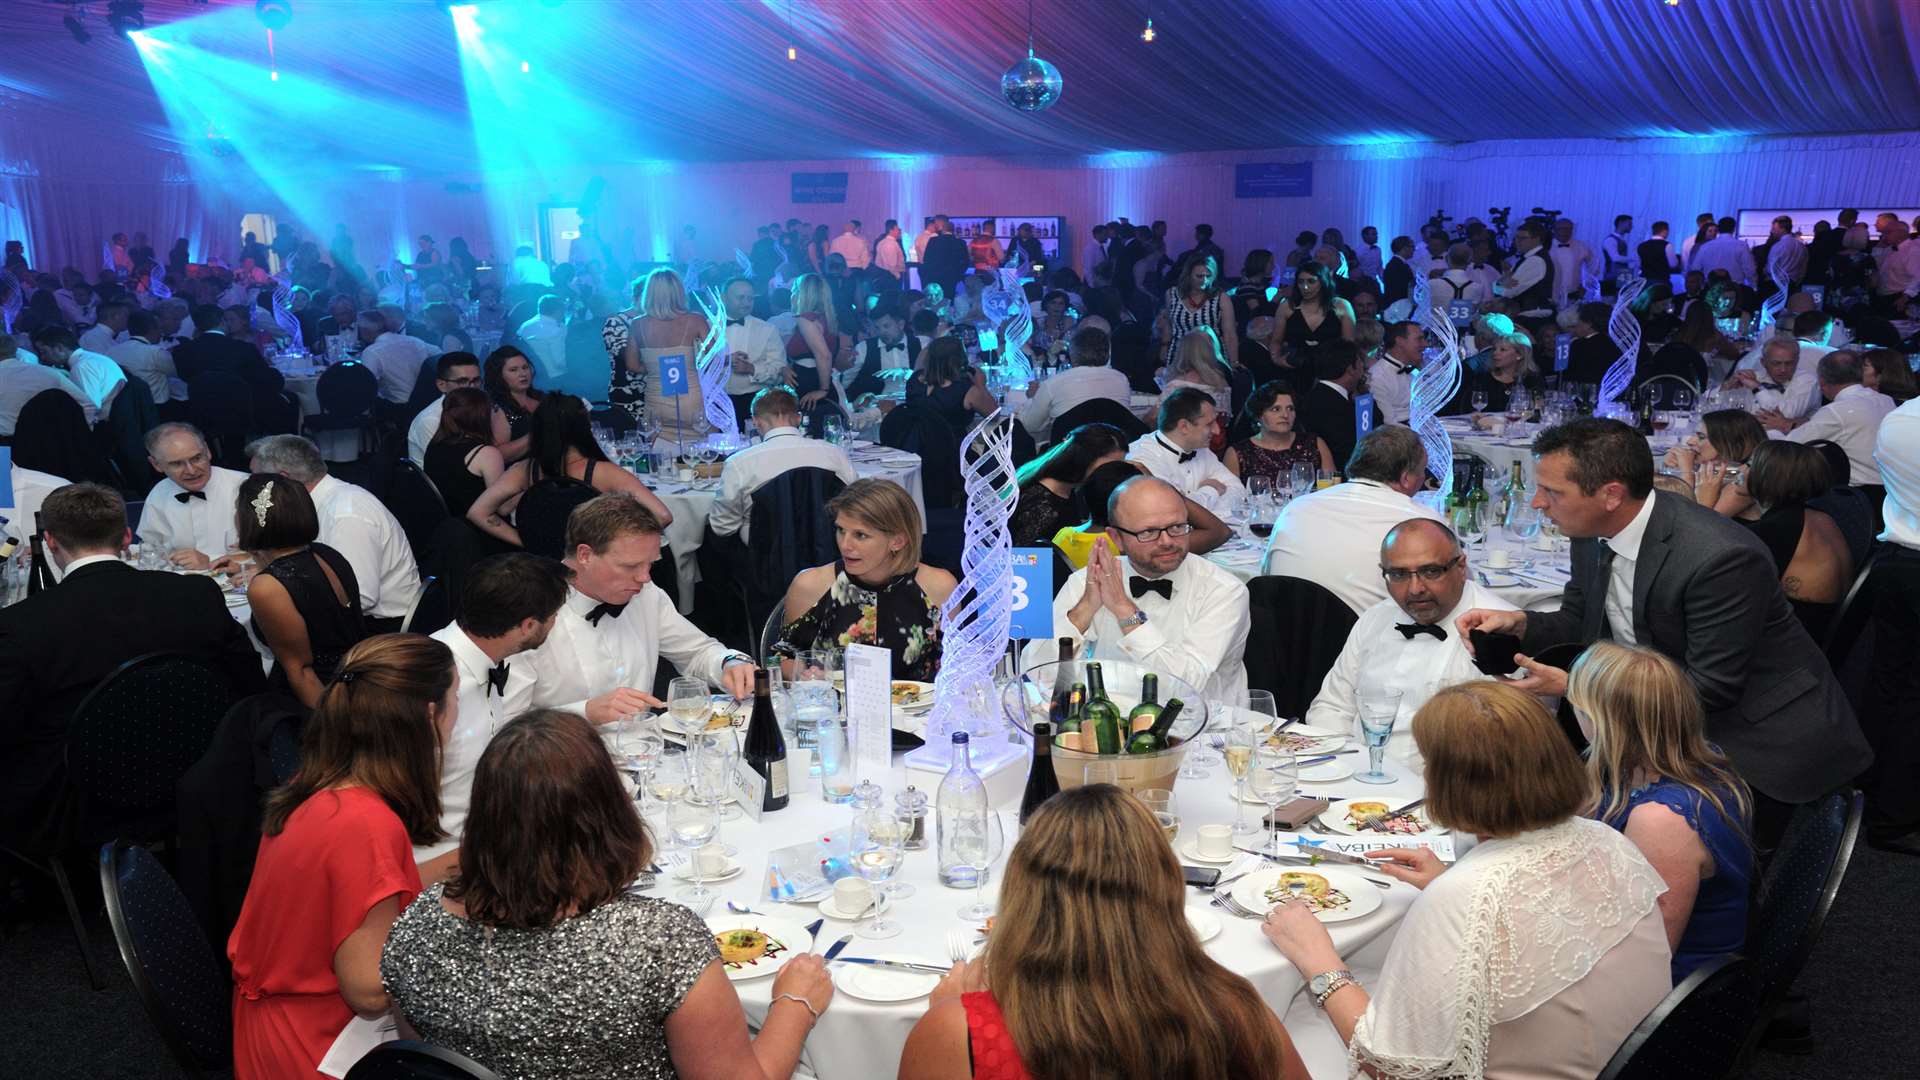 More than 600 people came to the KEiBA gala dinner last year